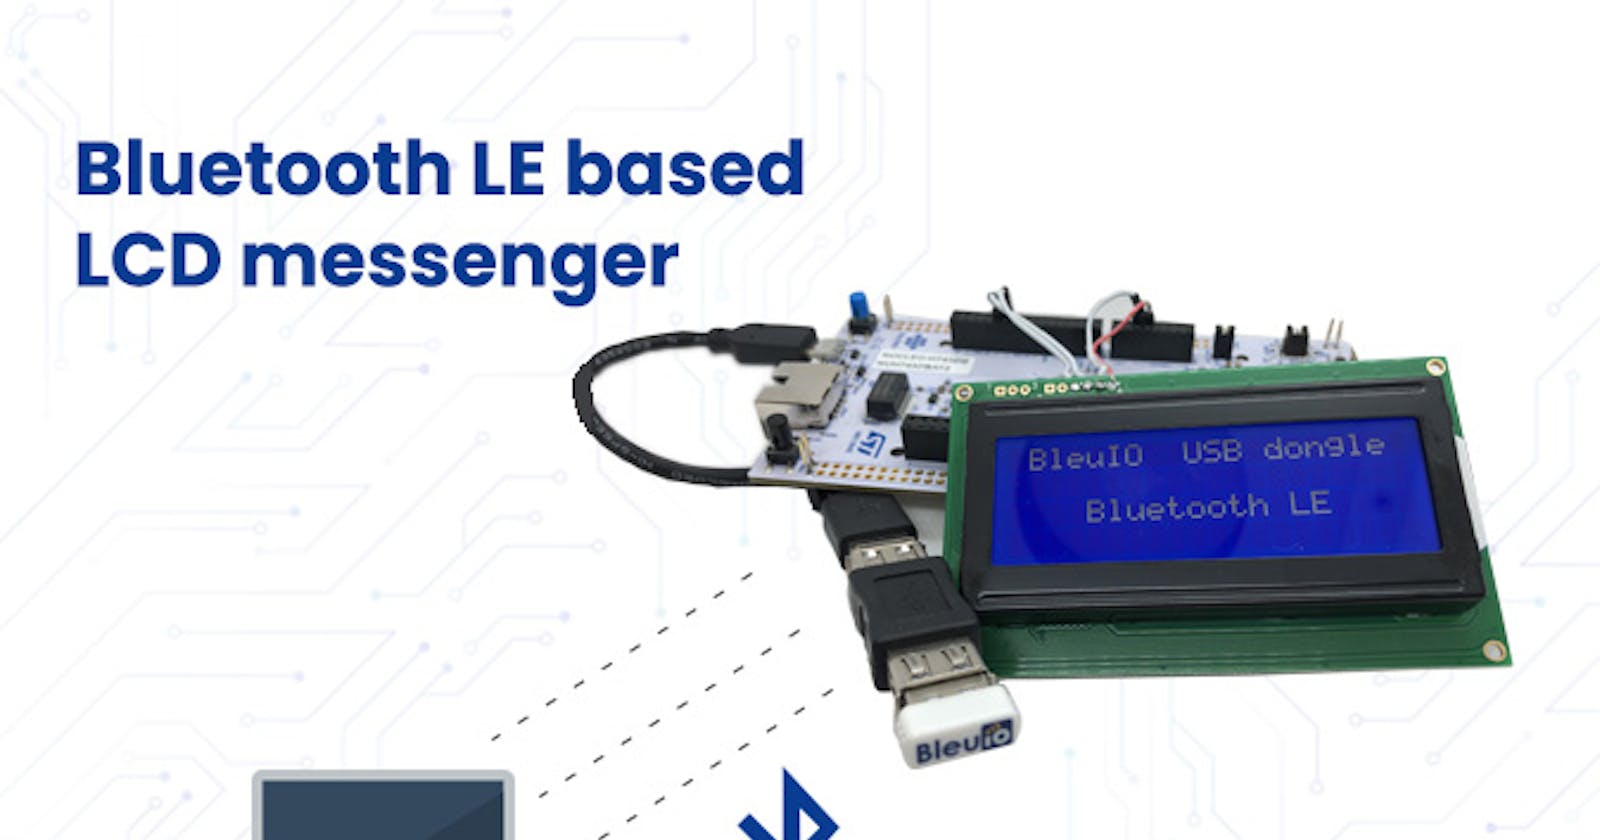 Bluetooth LE based LCD messenger using STM32